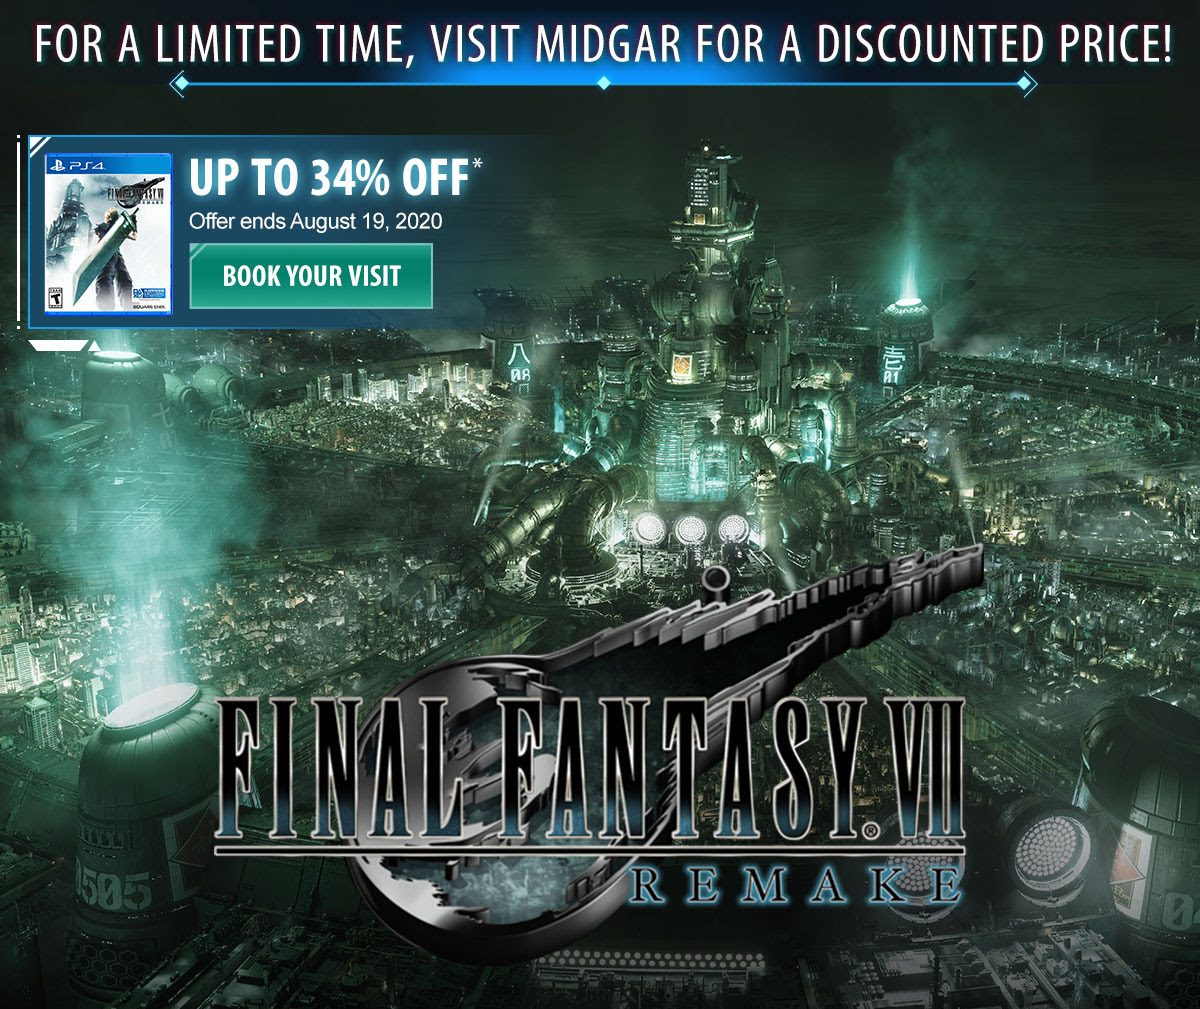 For a limited time, visit Midgar for a discounted price!